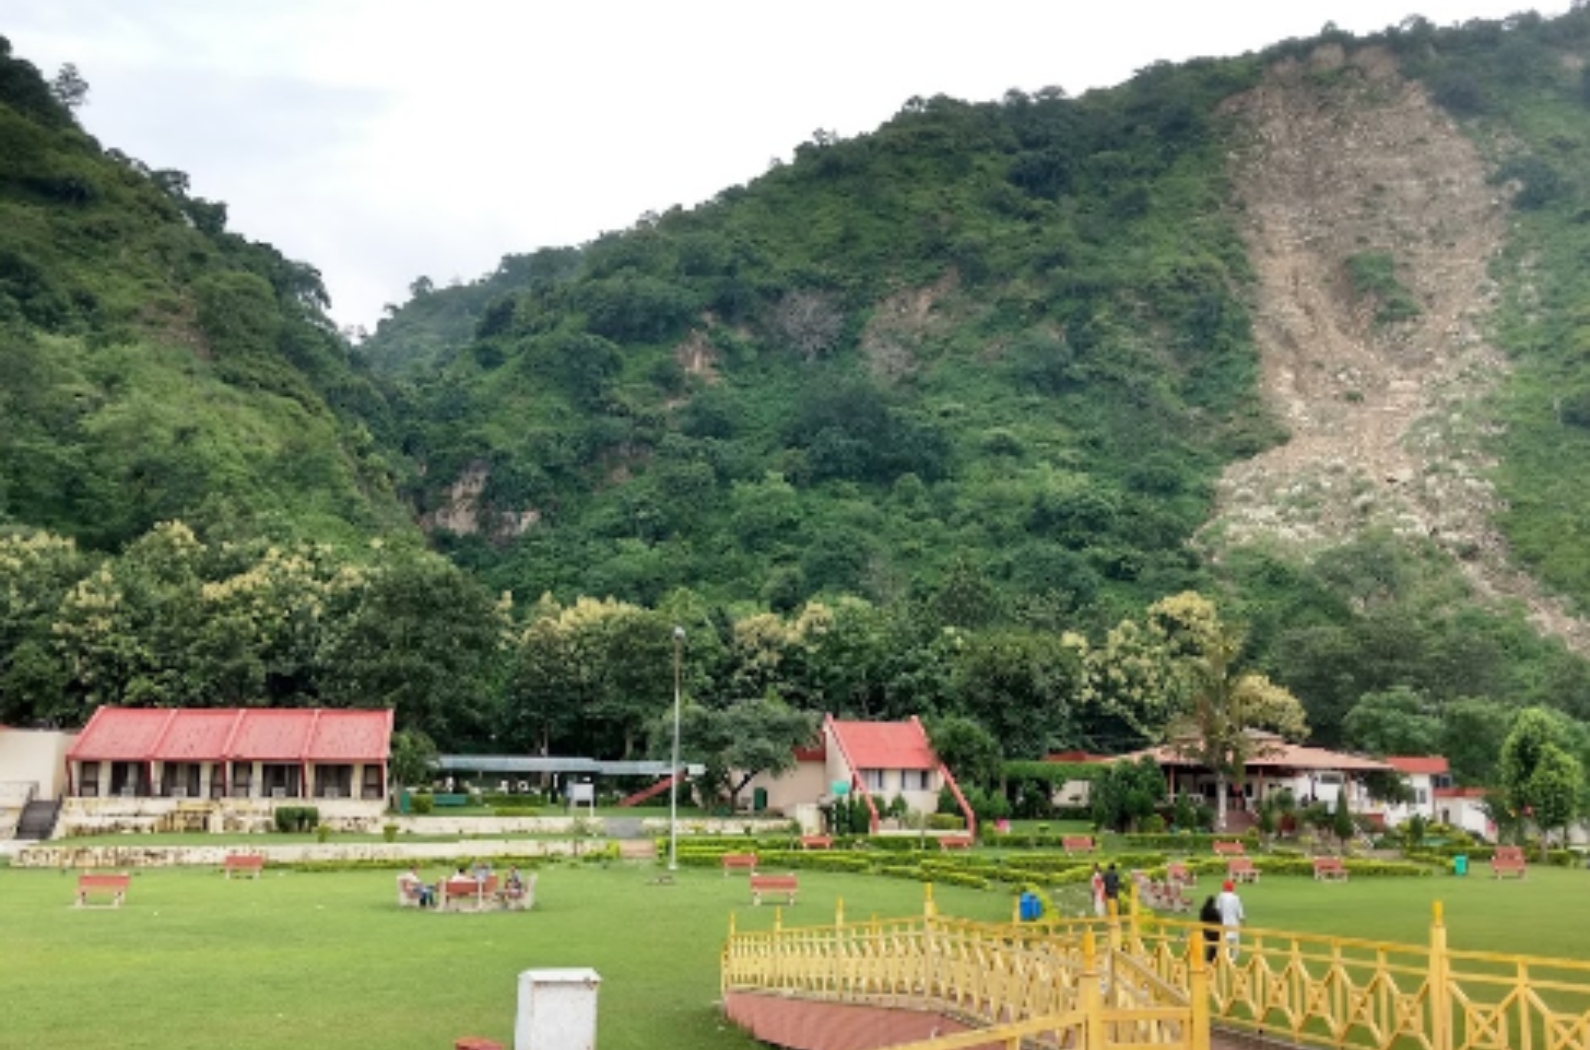 During the British Raj, the hills were left neglected, and it had been only once India’s independence that Morni Hills came to the limelight and were developed as a traveler hotspot.